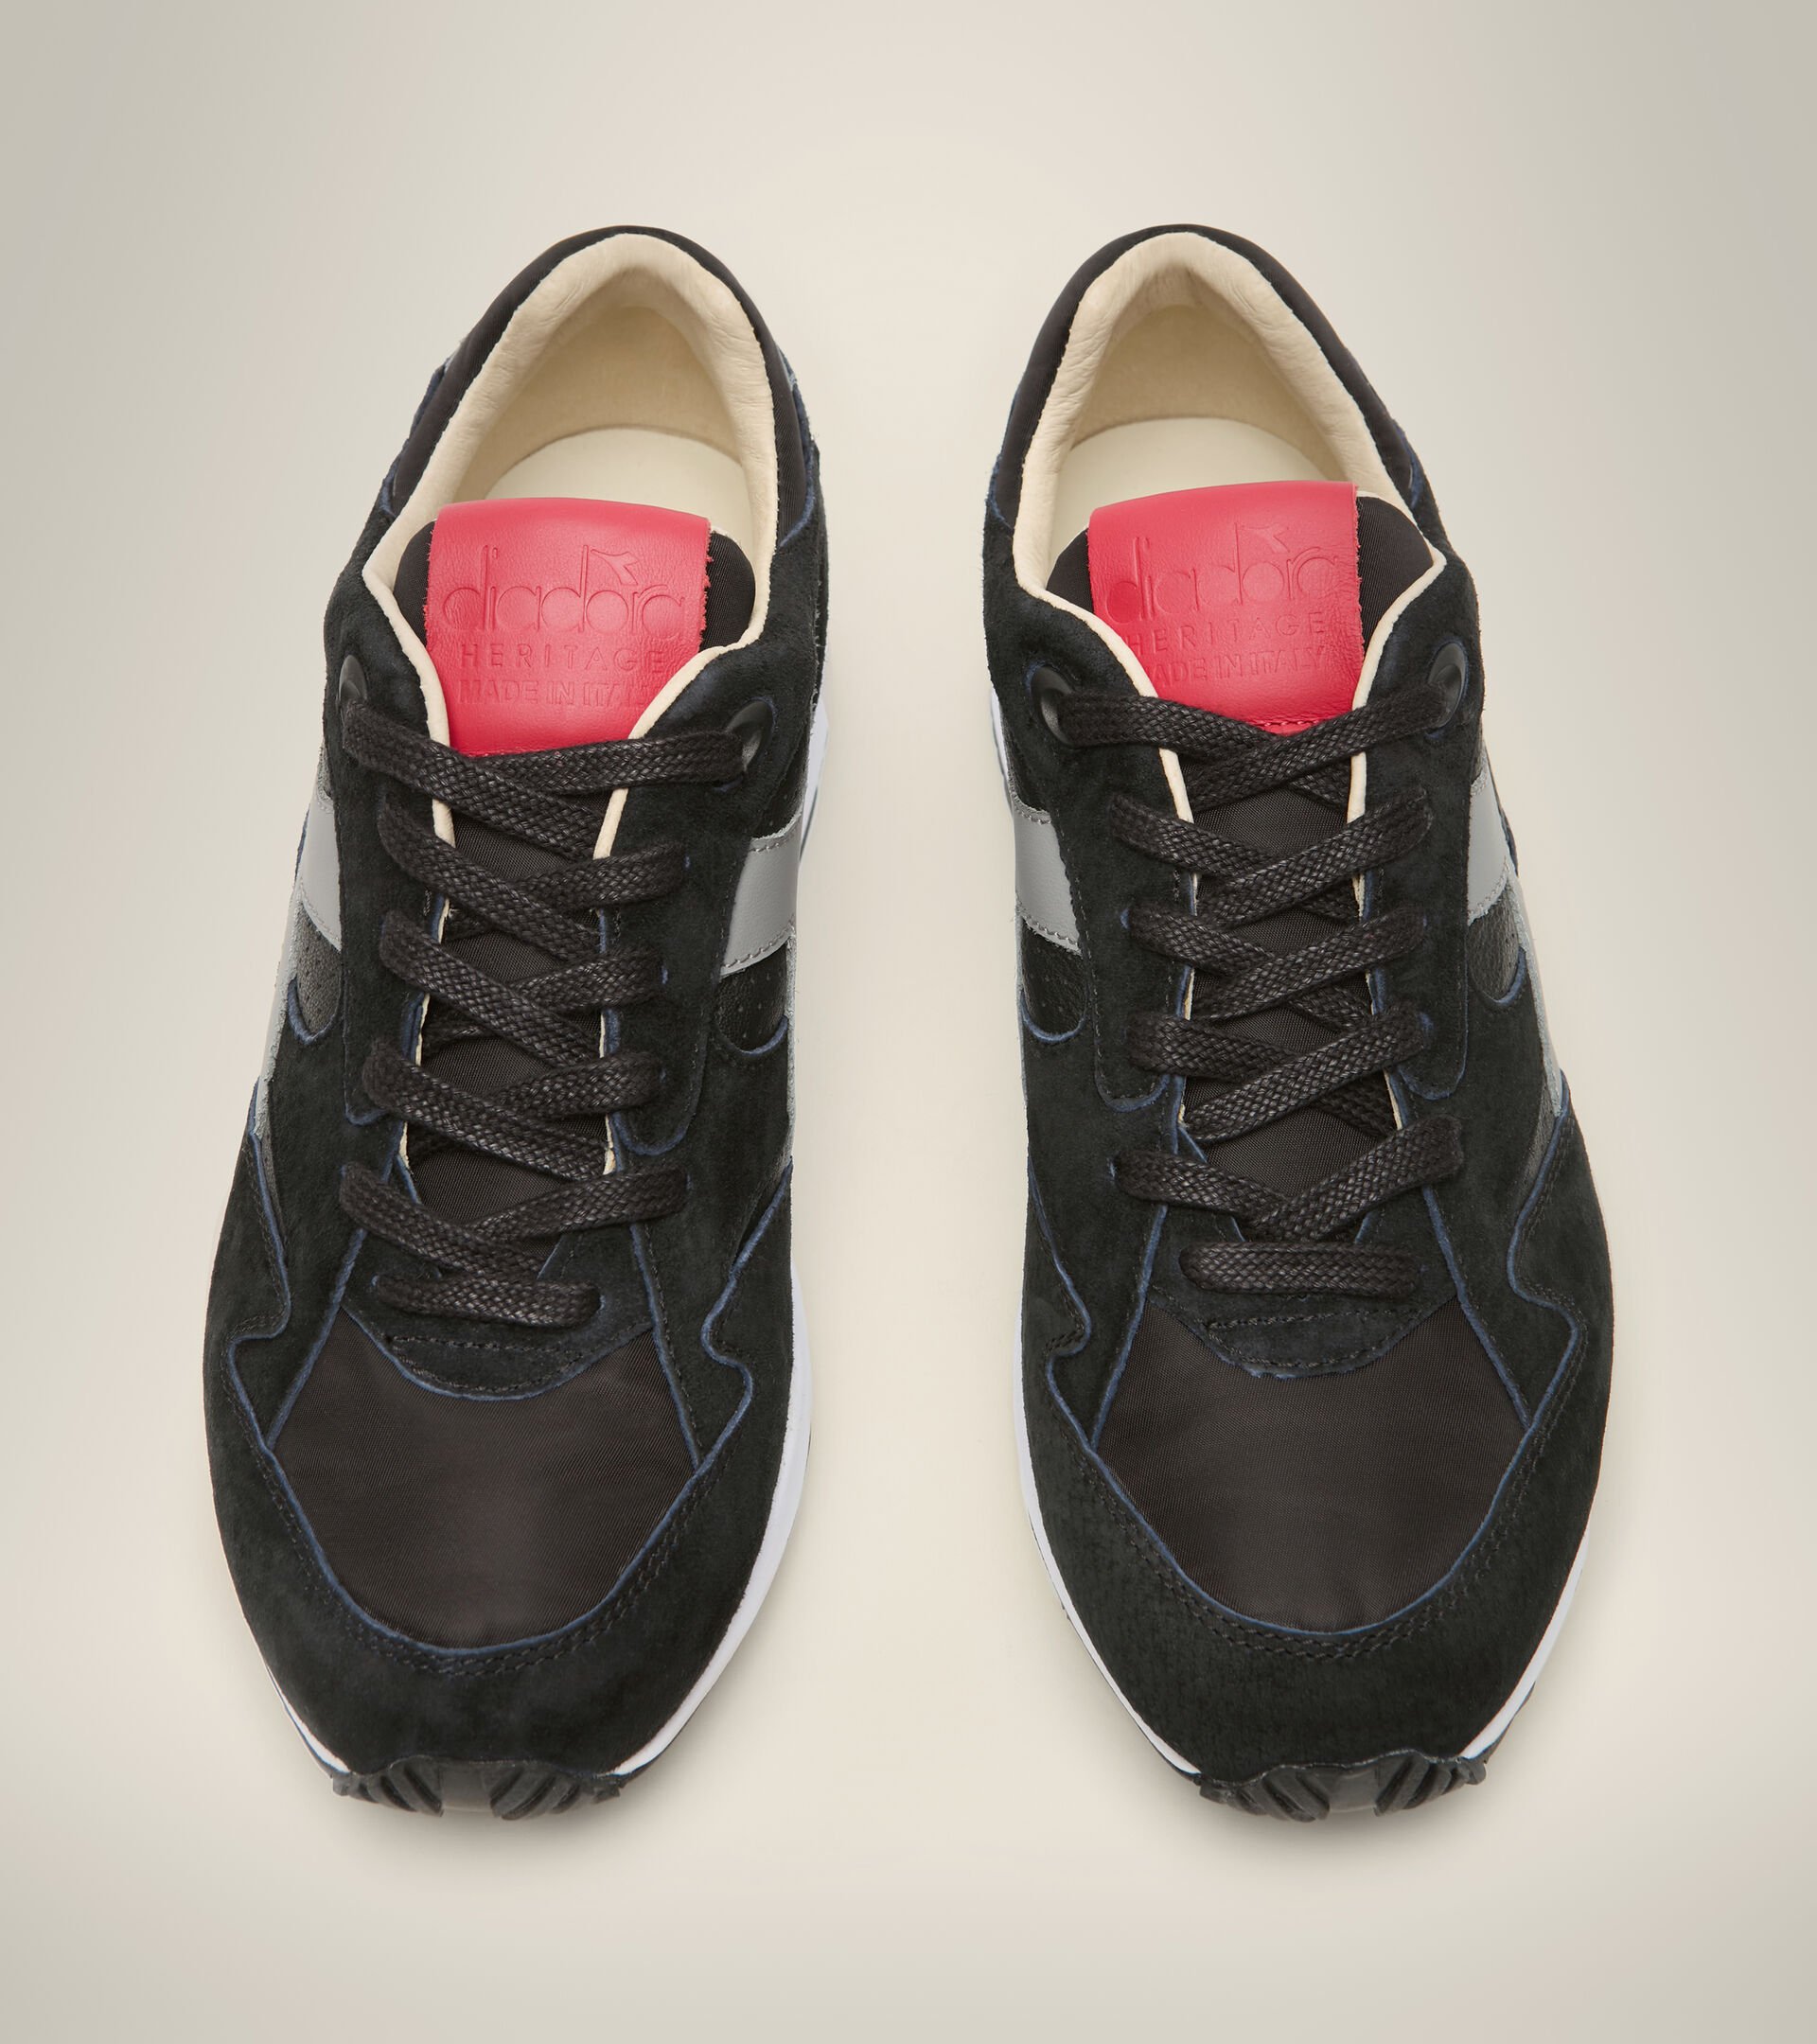 Chaussures Heritage Made in Italy - Homme ECLIPSE ITALIA NOIR - Diadora